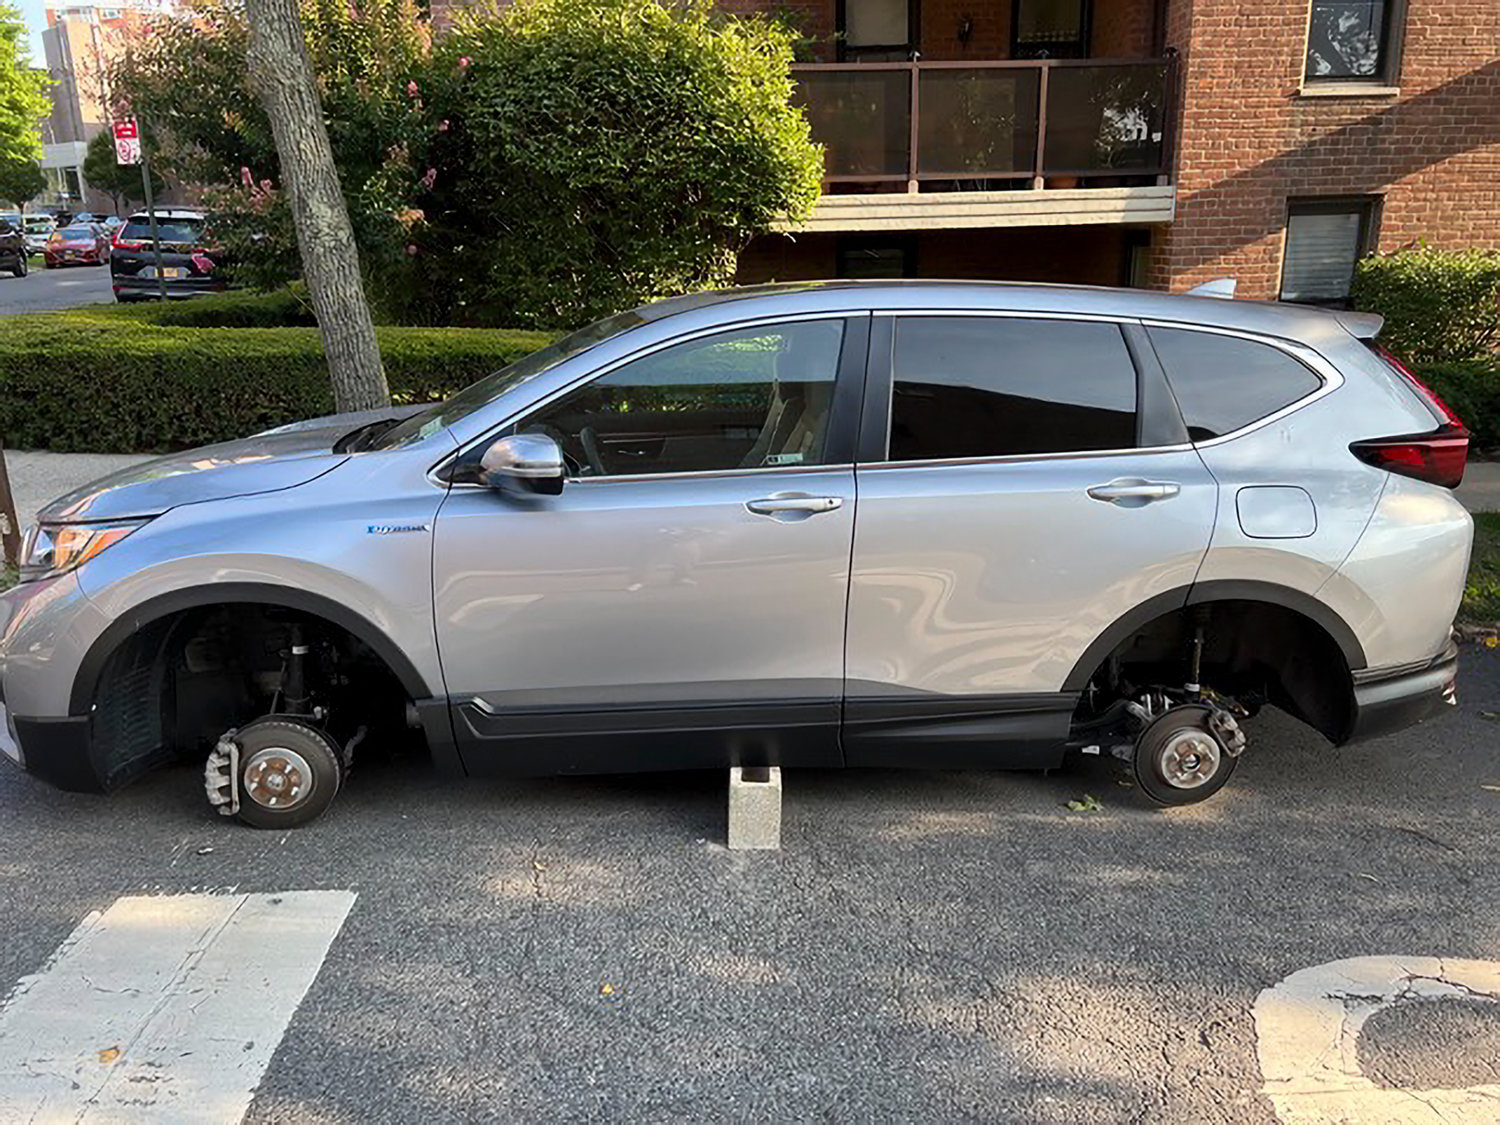 Courtesy of Fred Smith
At least two cars within the 50th Precinct had their tires and rims stolen and their cars placed on blocks over the weekend. A 2021 Honda SUV on West 236th Street and Netherland Avenue was left on cinder blocks after the thieves took all four tires and rims. Meanwhile, on Saturday morning, another new car lost three of its four tires and rims on the southwest corner of Liebig Avenue and West 259th Street.